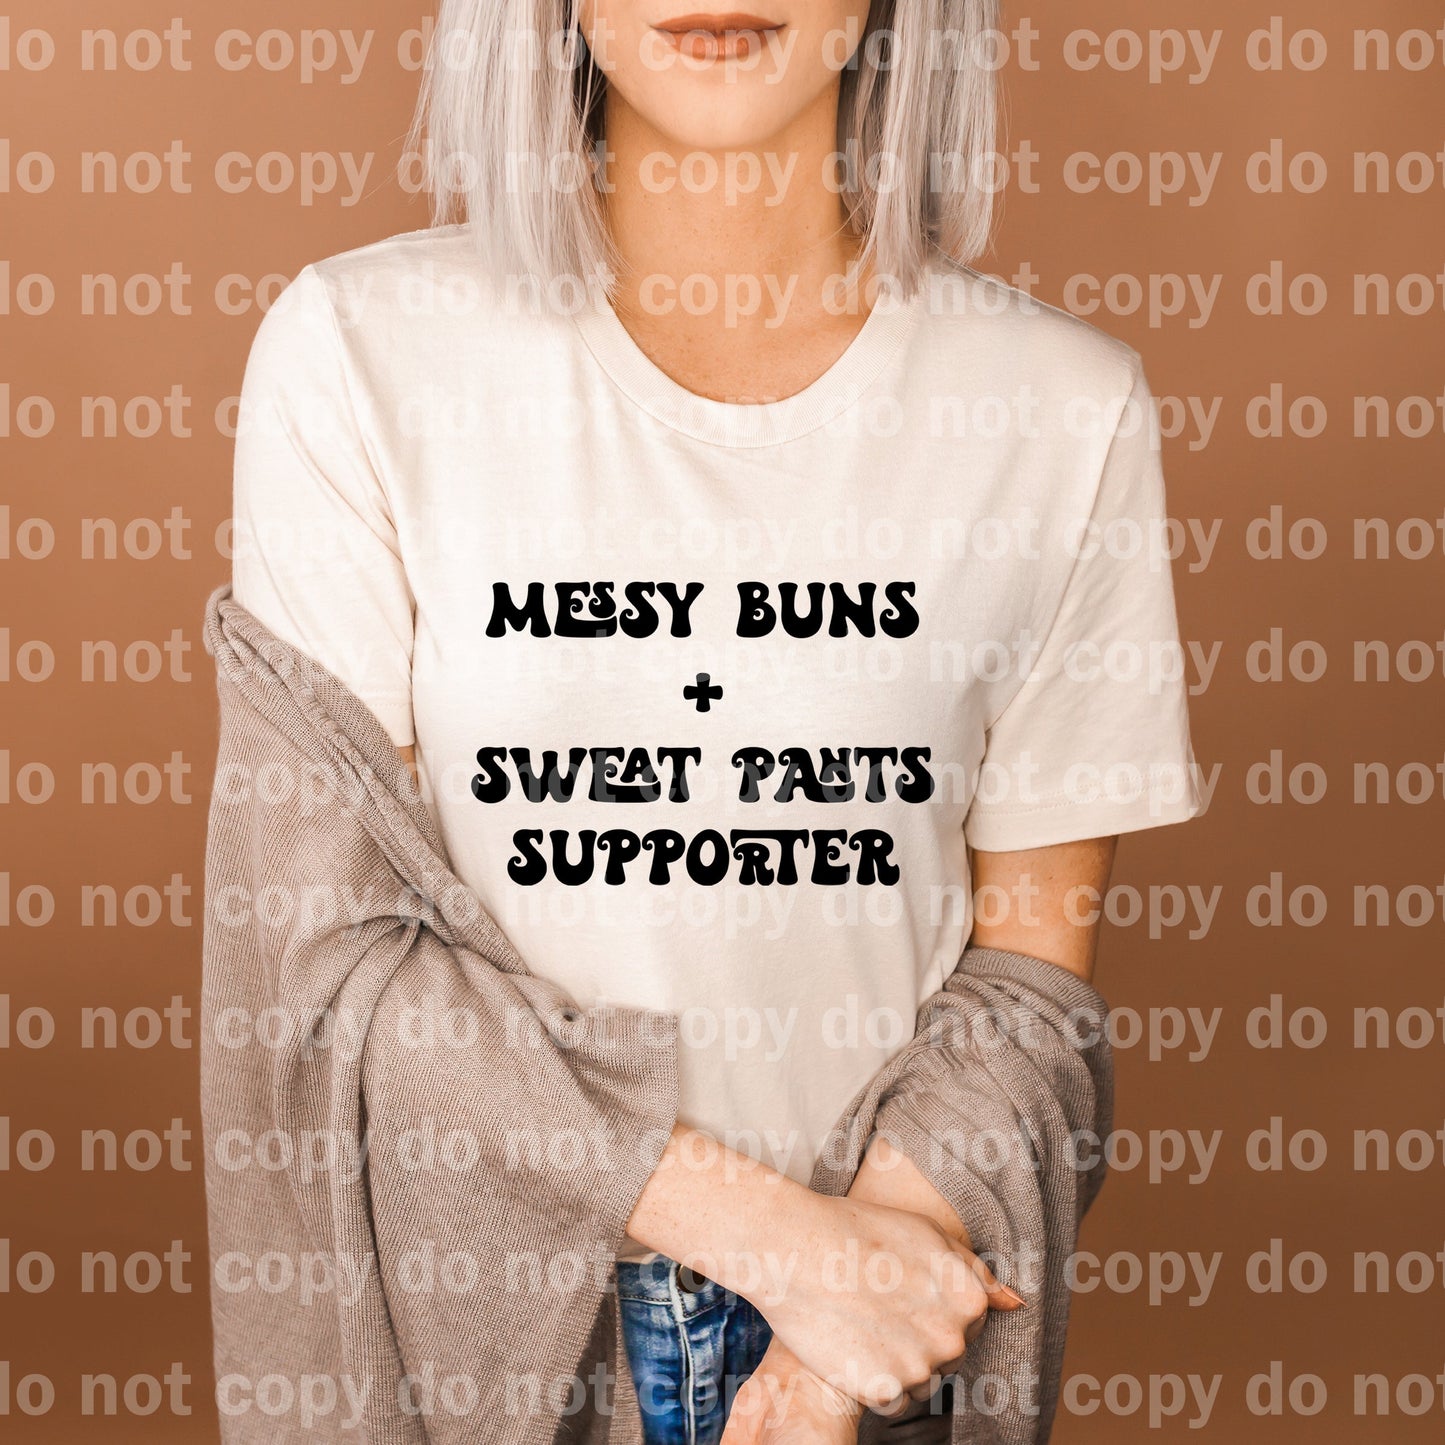 Messy Buns And Sweat Pants Supporter Full Color/One Color Dream Print or Sublimation Print